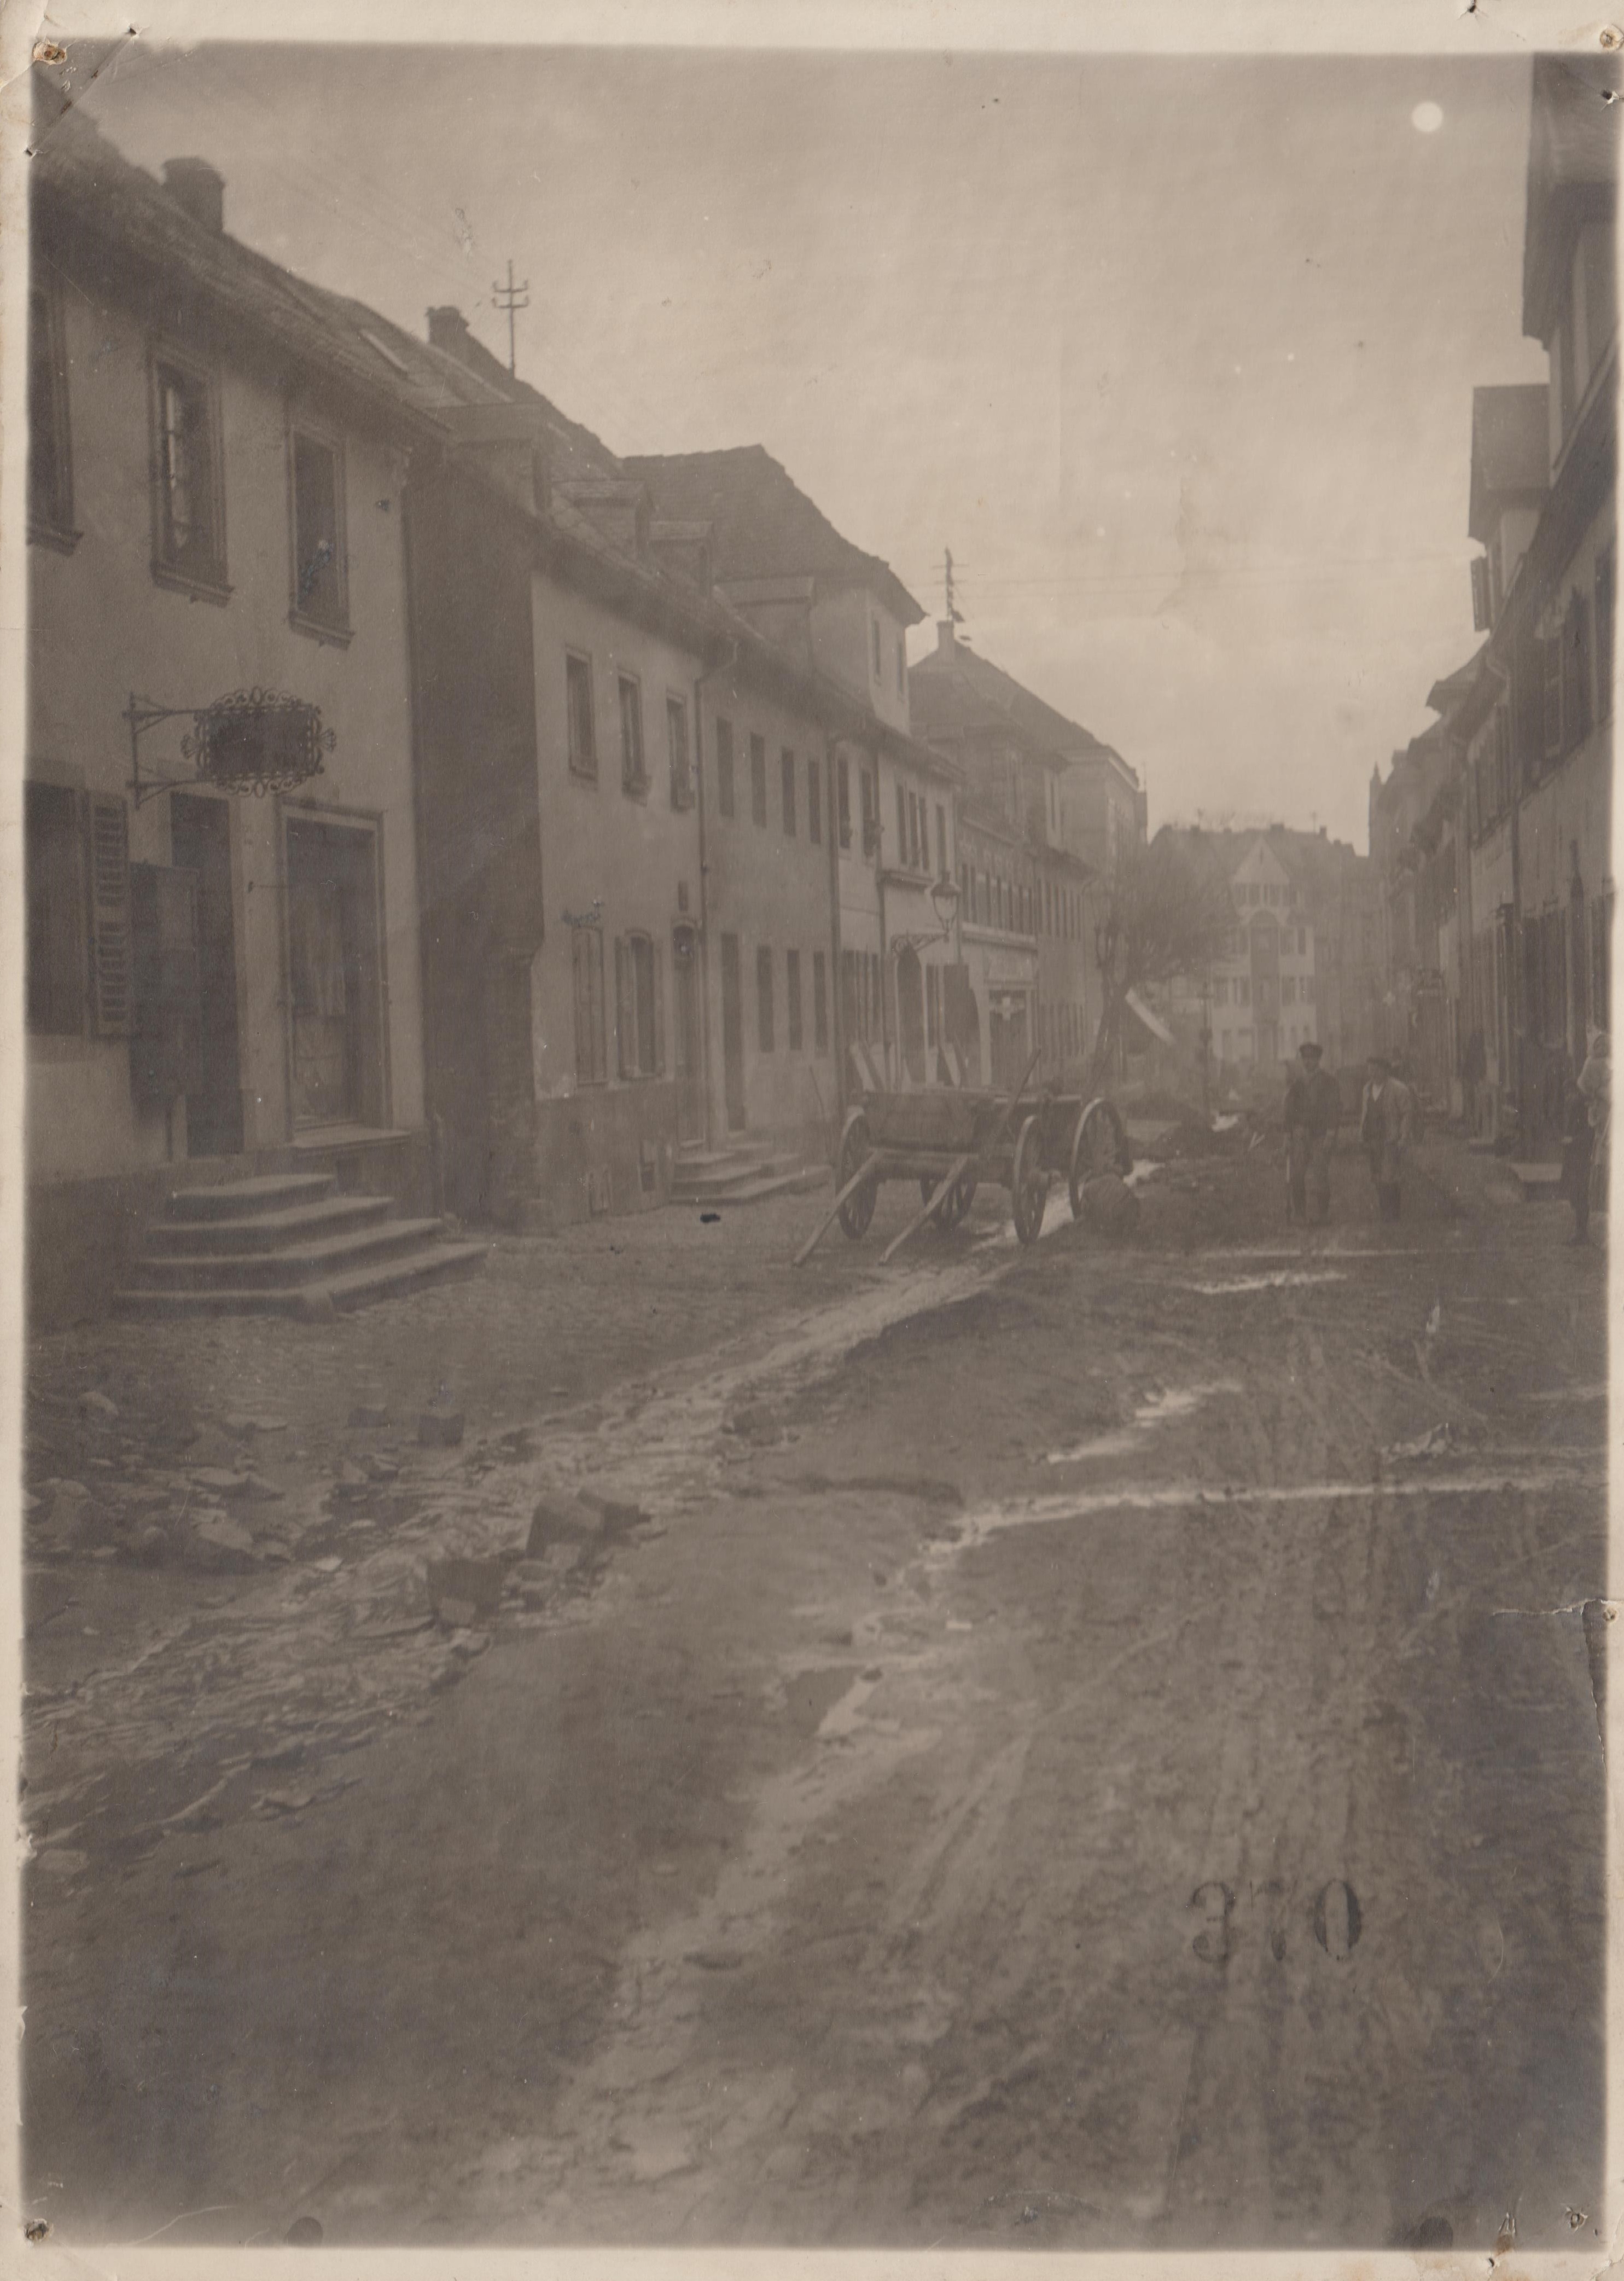 Obere Bachstrasse in Bendorf, Kanalisierung 1927 (REM CC BY-NC-SA)